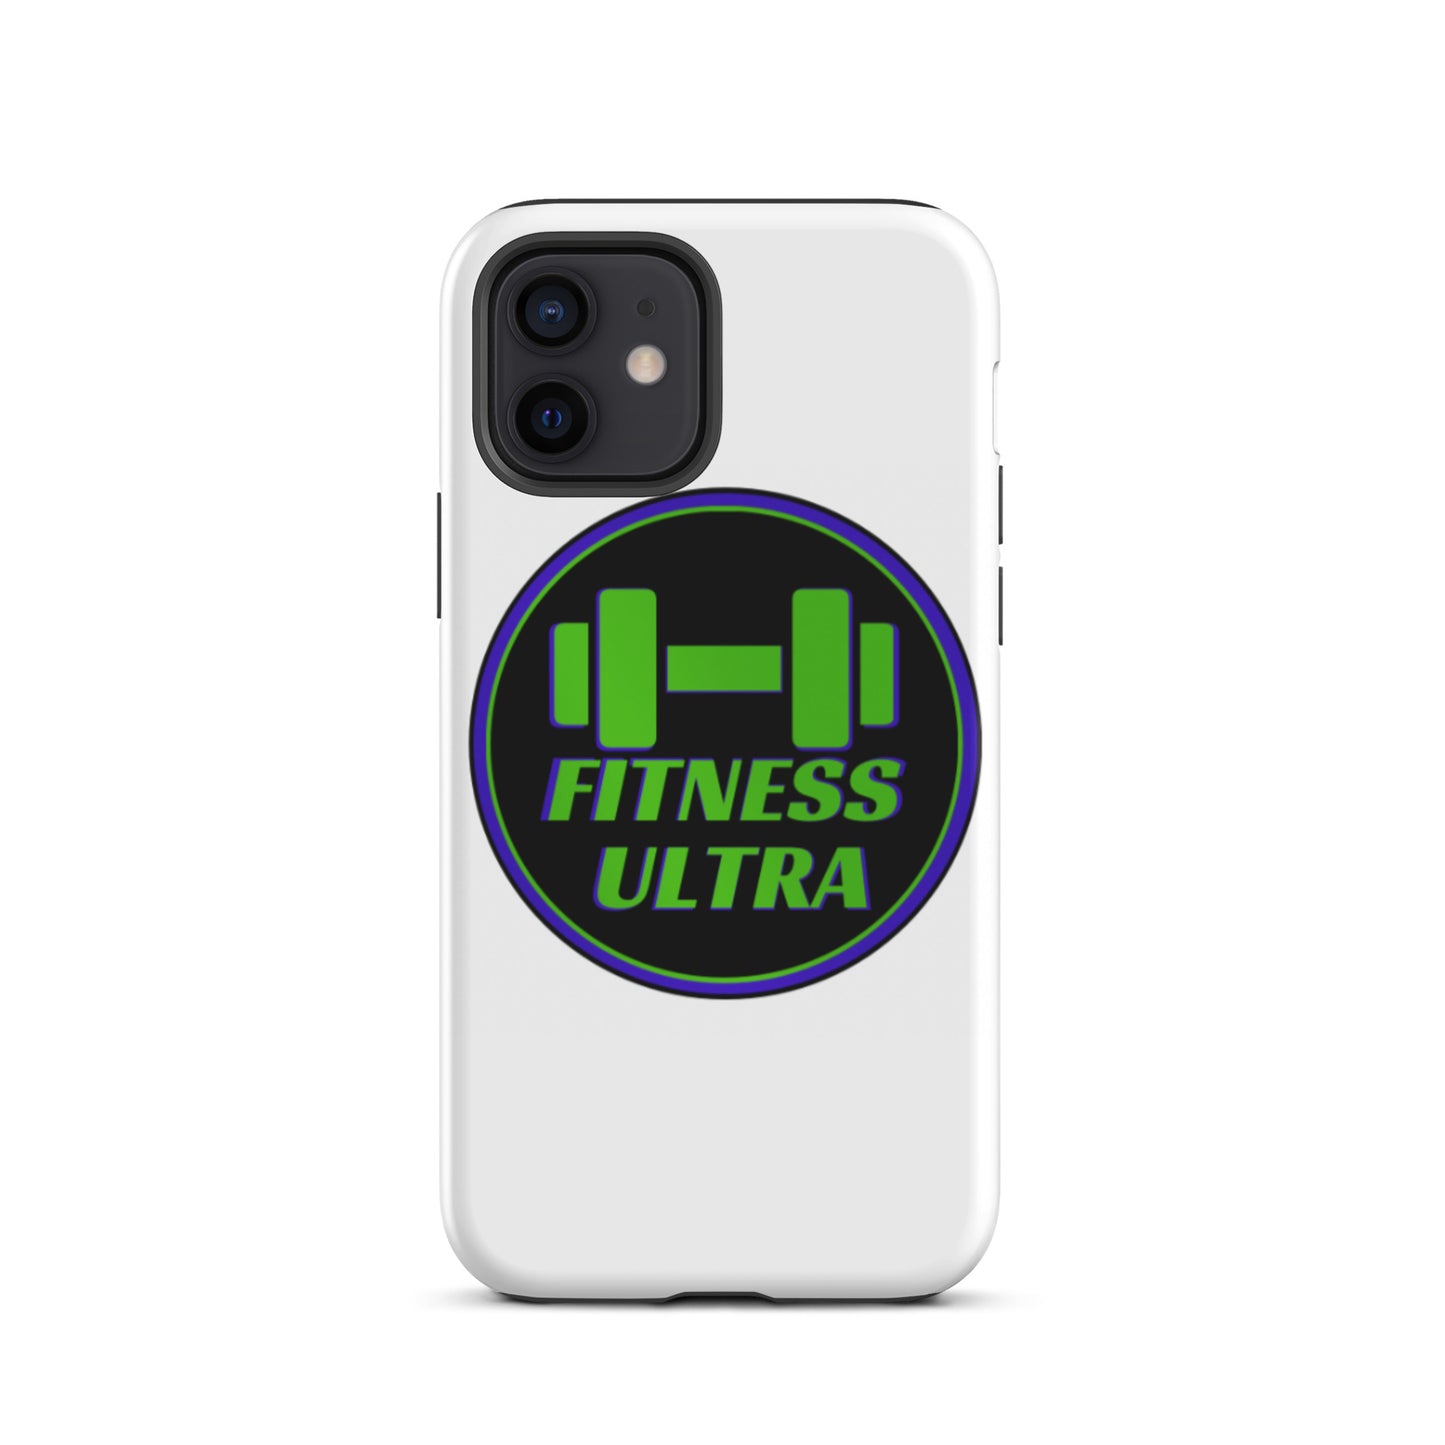 FitnessUltra iPhone case